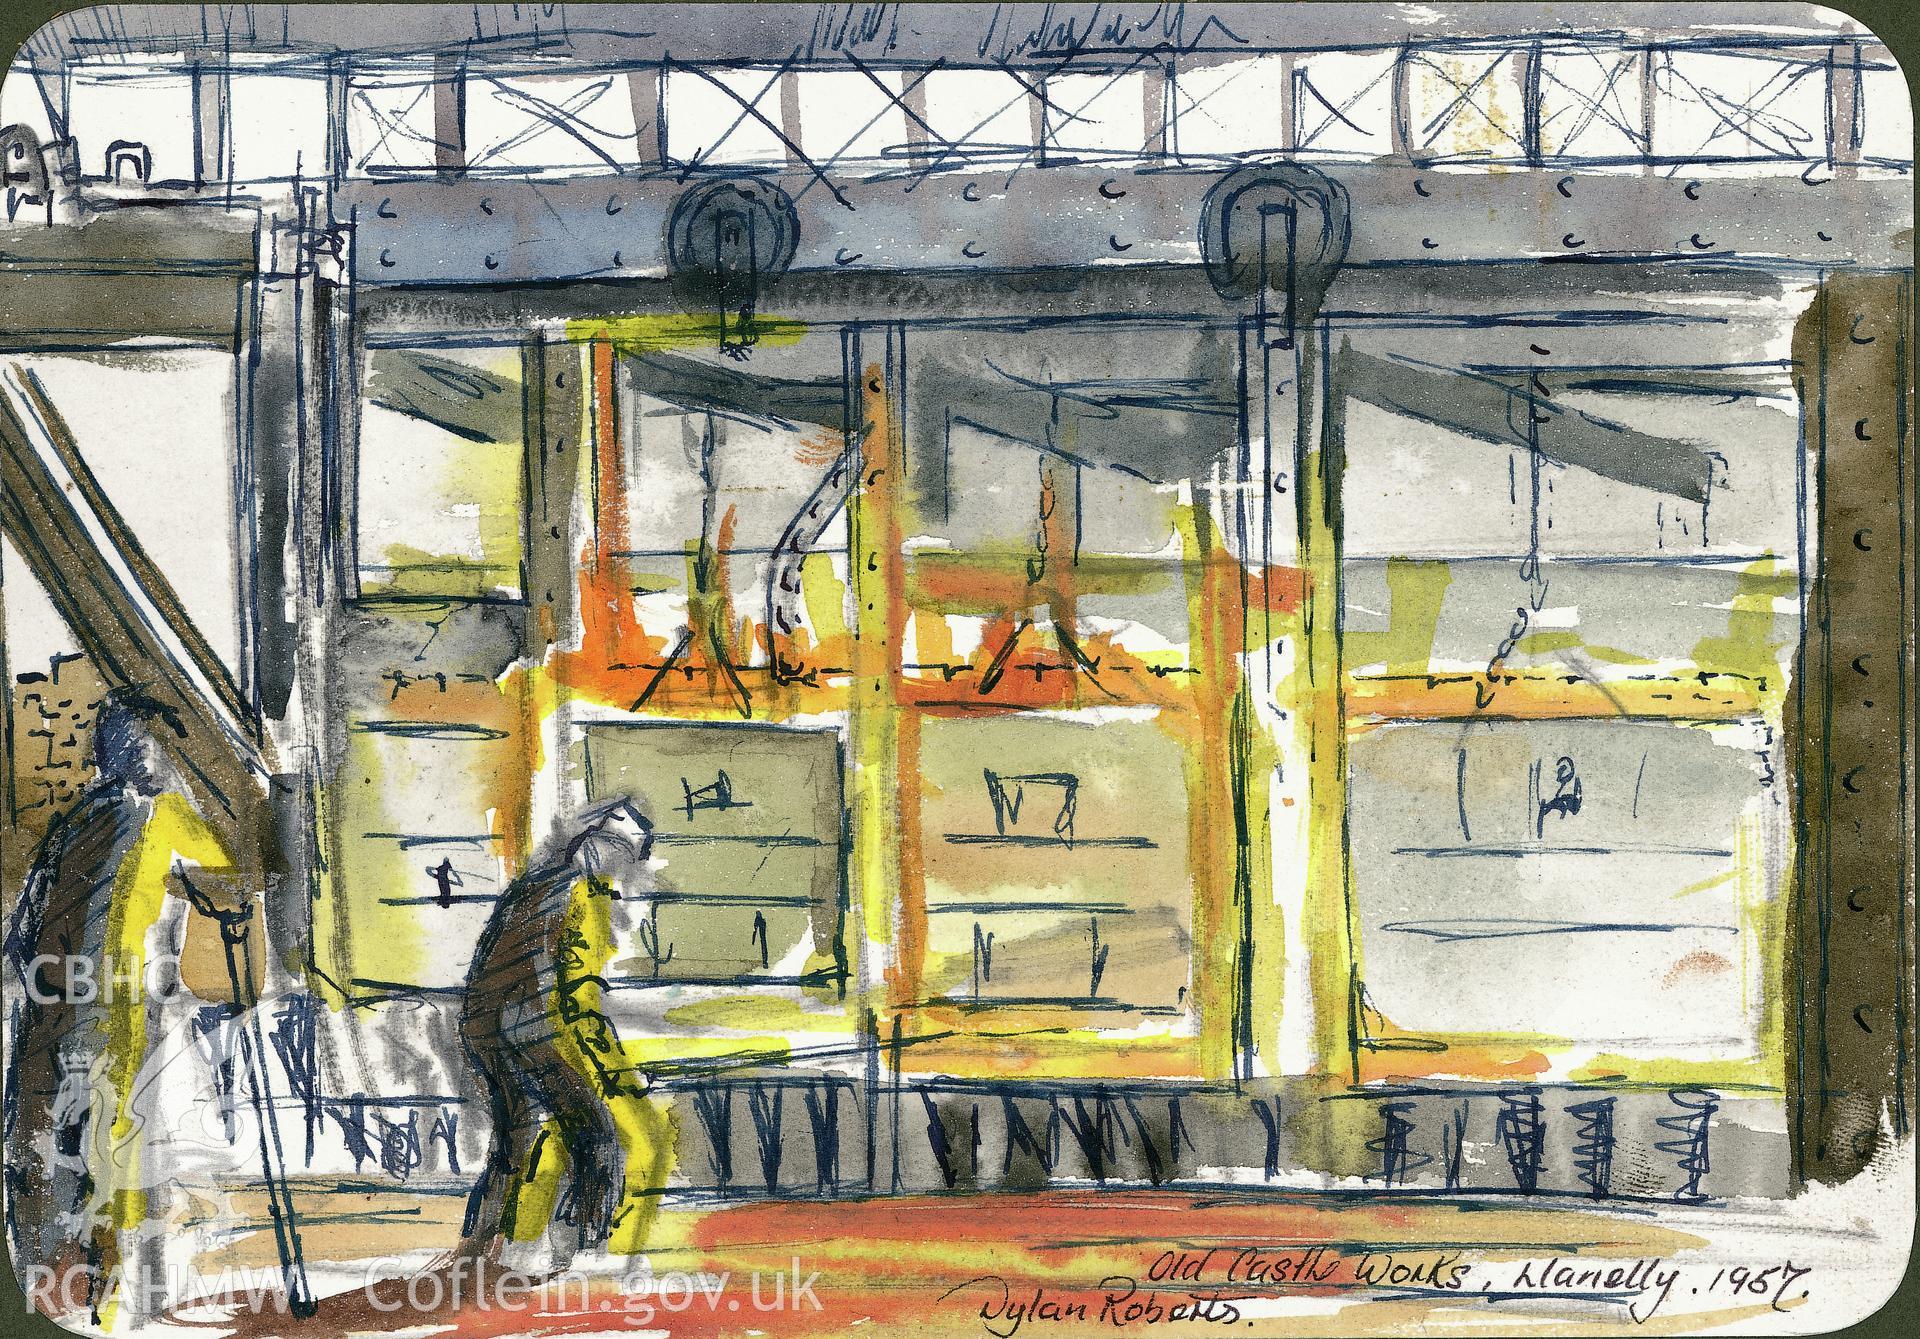 Coloured sketch by Dylan Roberts showing men at work in the interior of Old Castle Works, Llanelli.